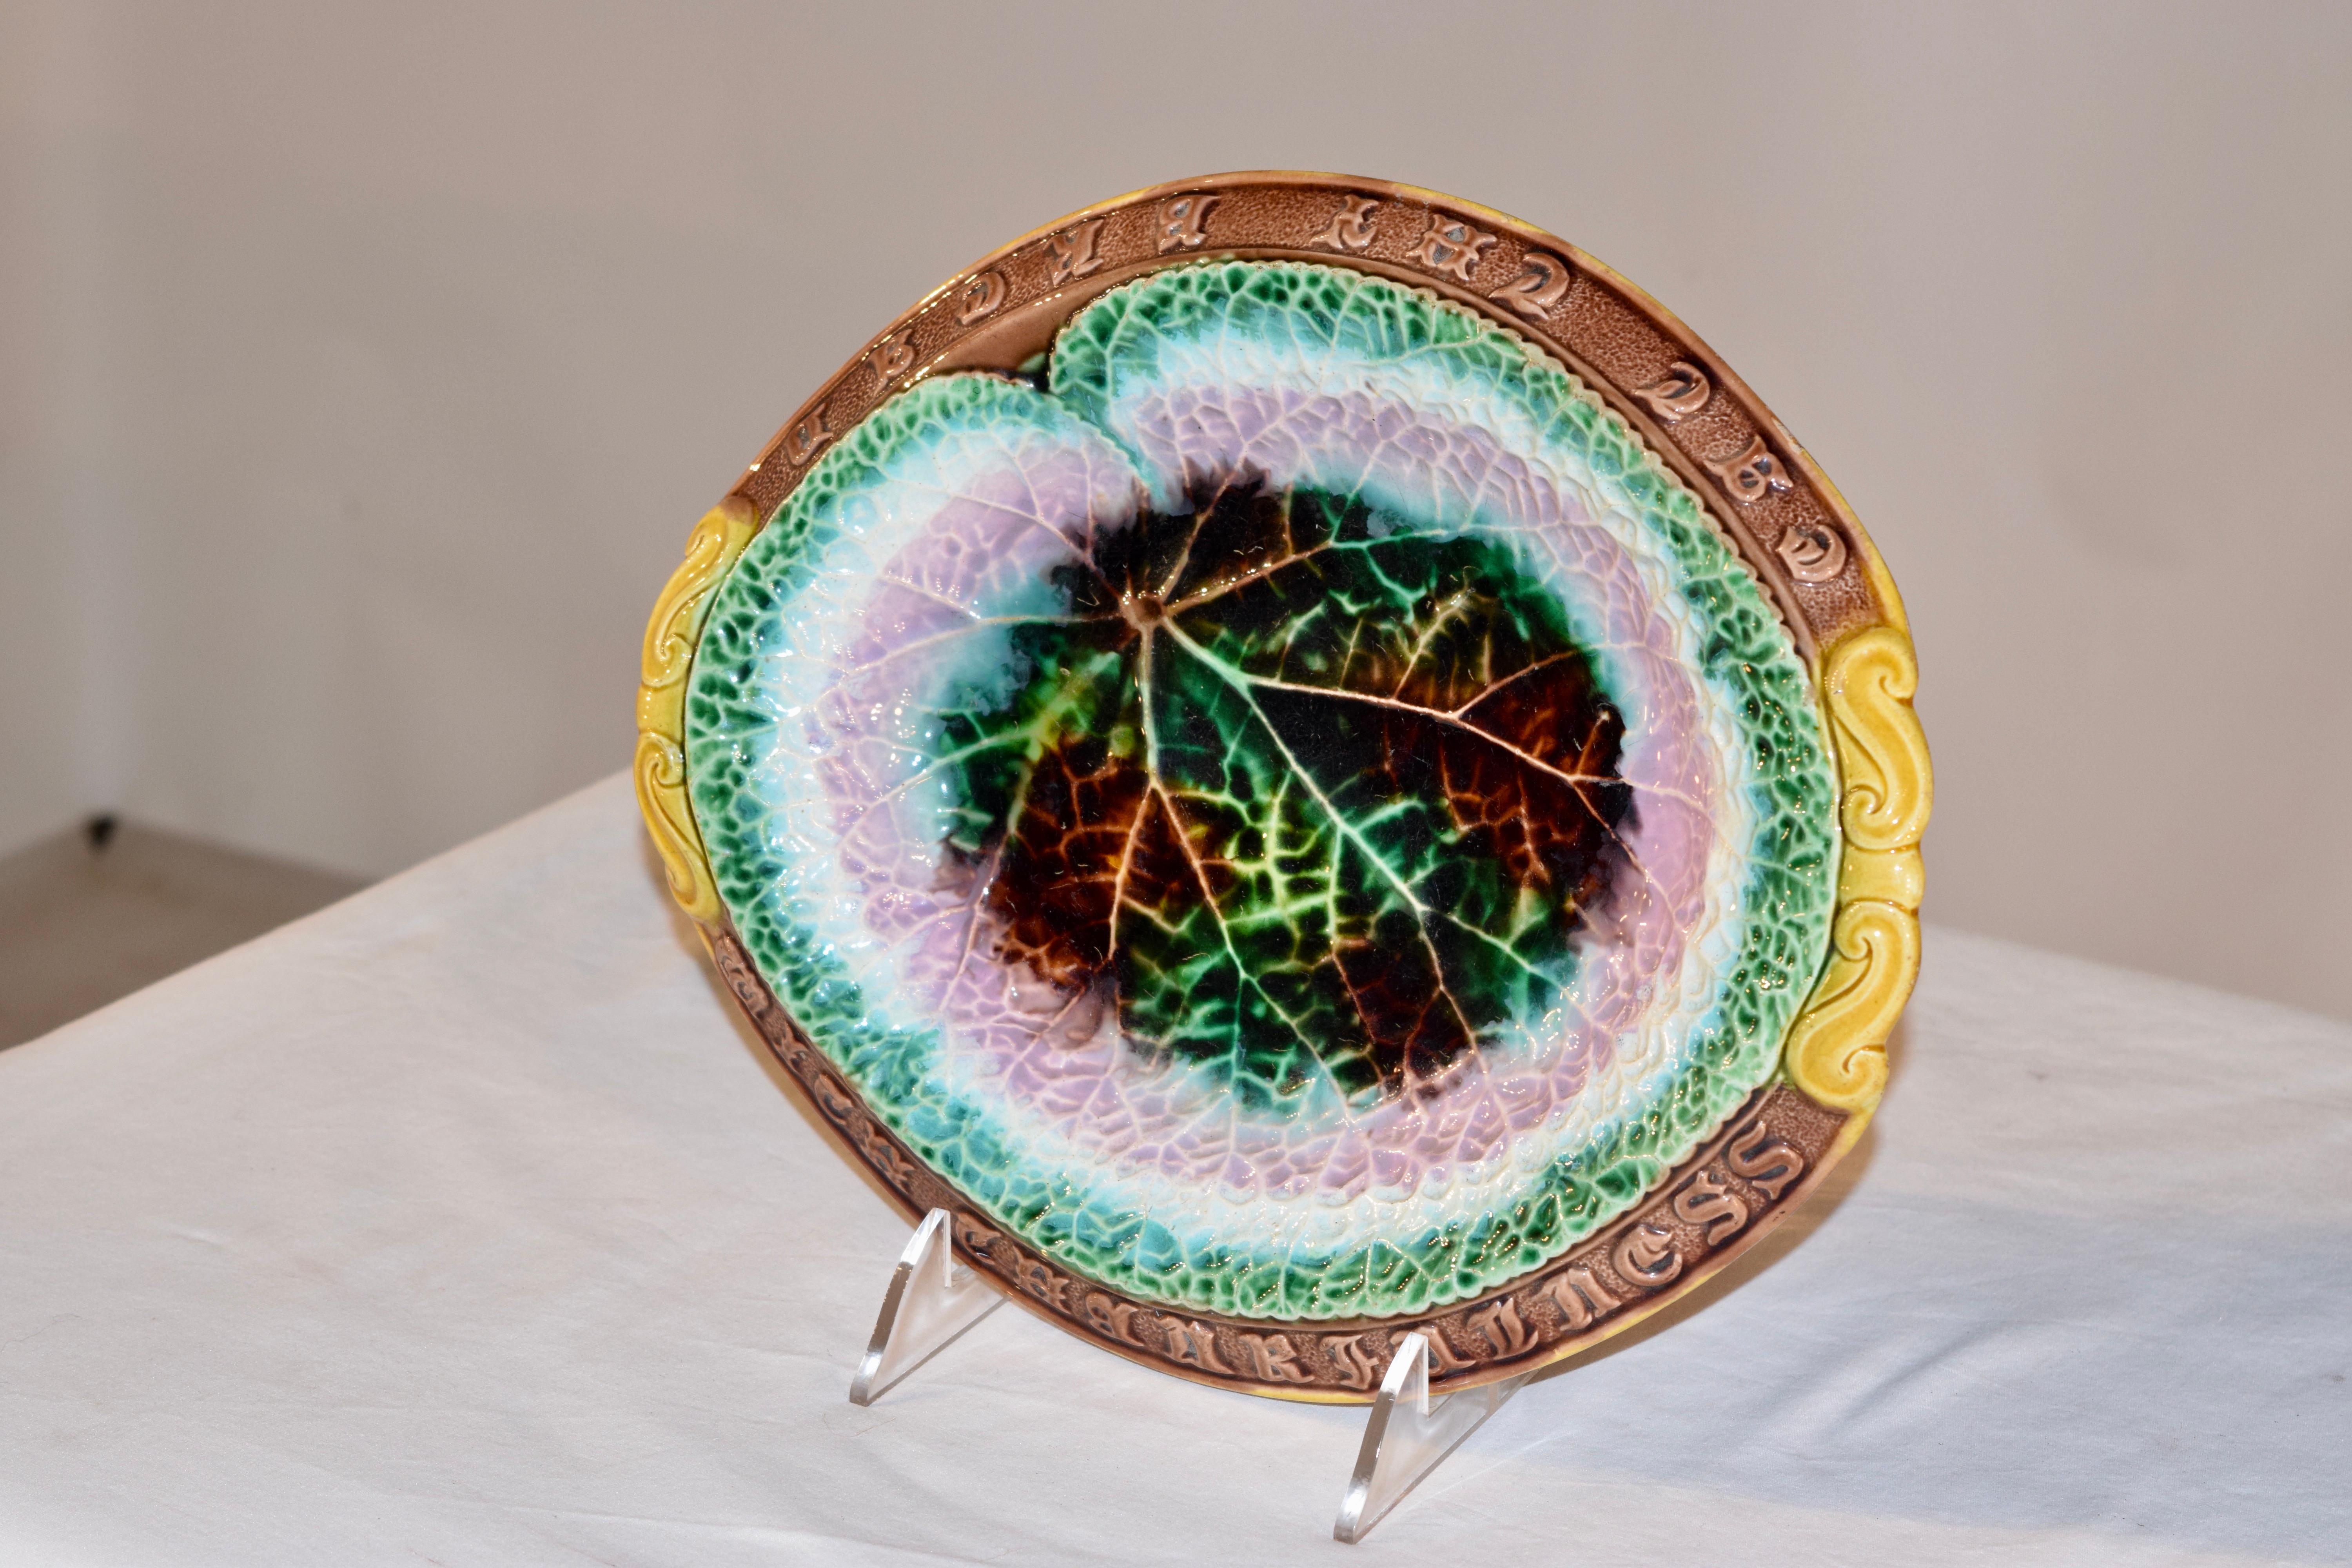 19th century Majolica bread tray in a lovely mold with a central leaf design in a multicolored palette of green, brown, pink and white, surrounded by a brown rim with gold accented handles and the words 